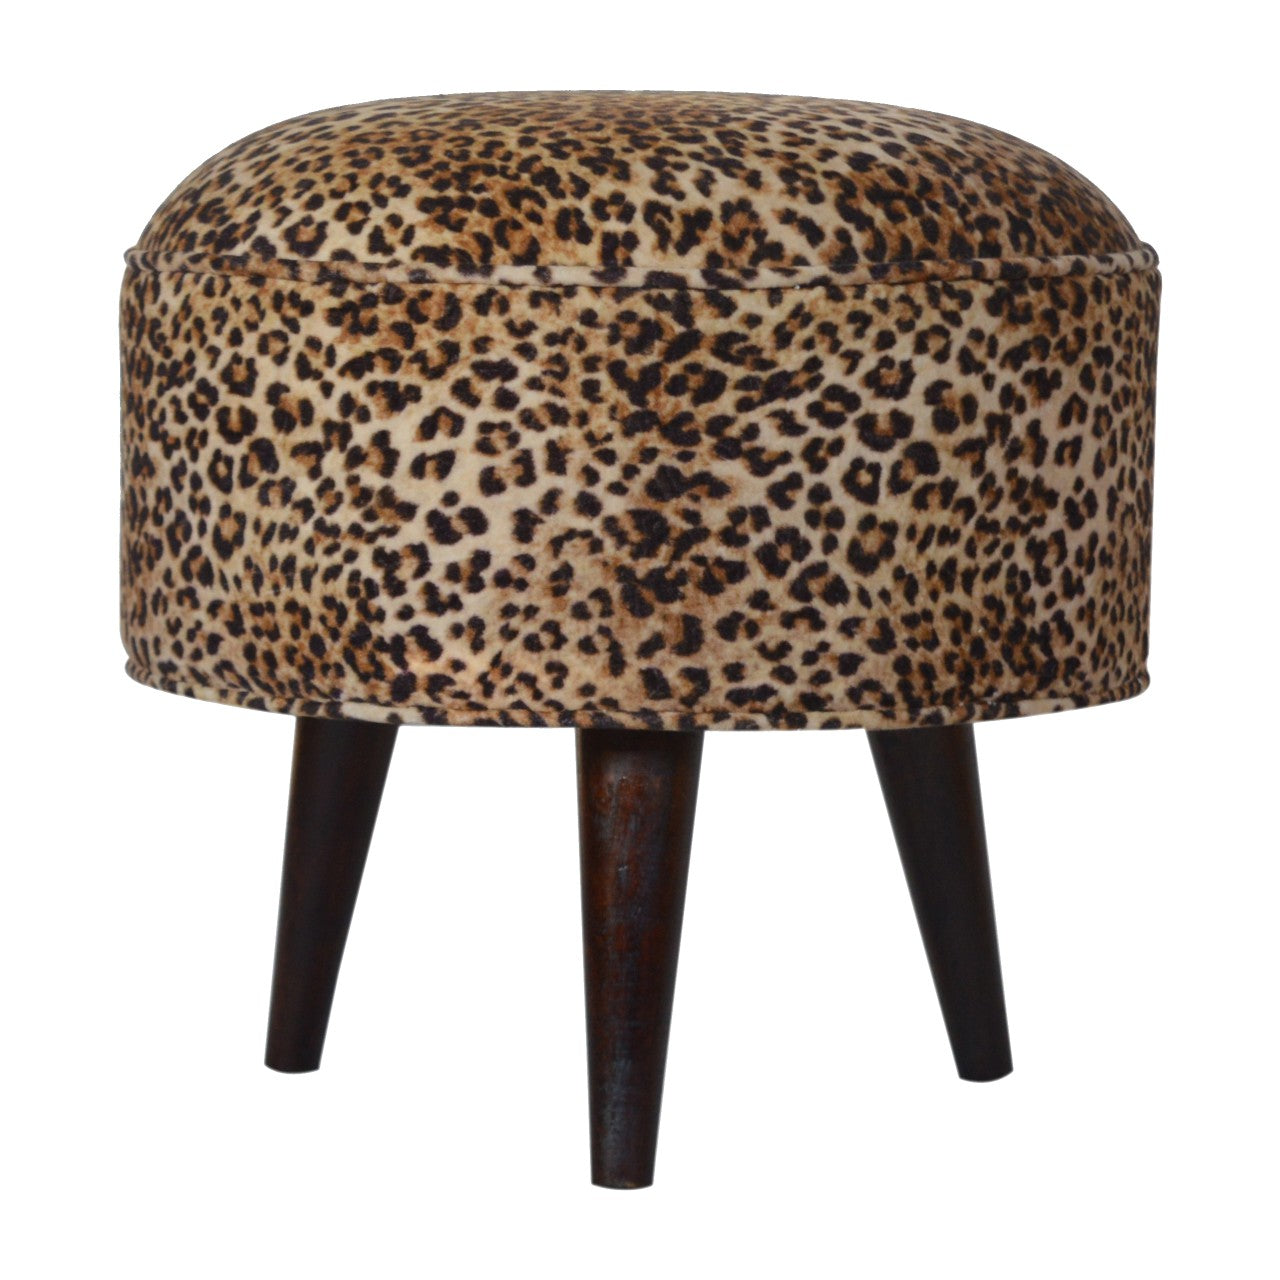 View Leopard Nordic Style Footstool information